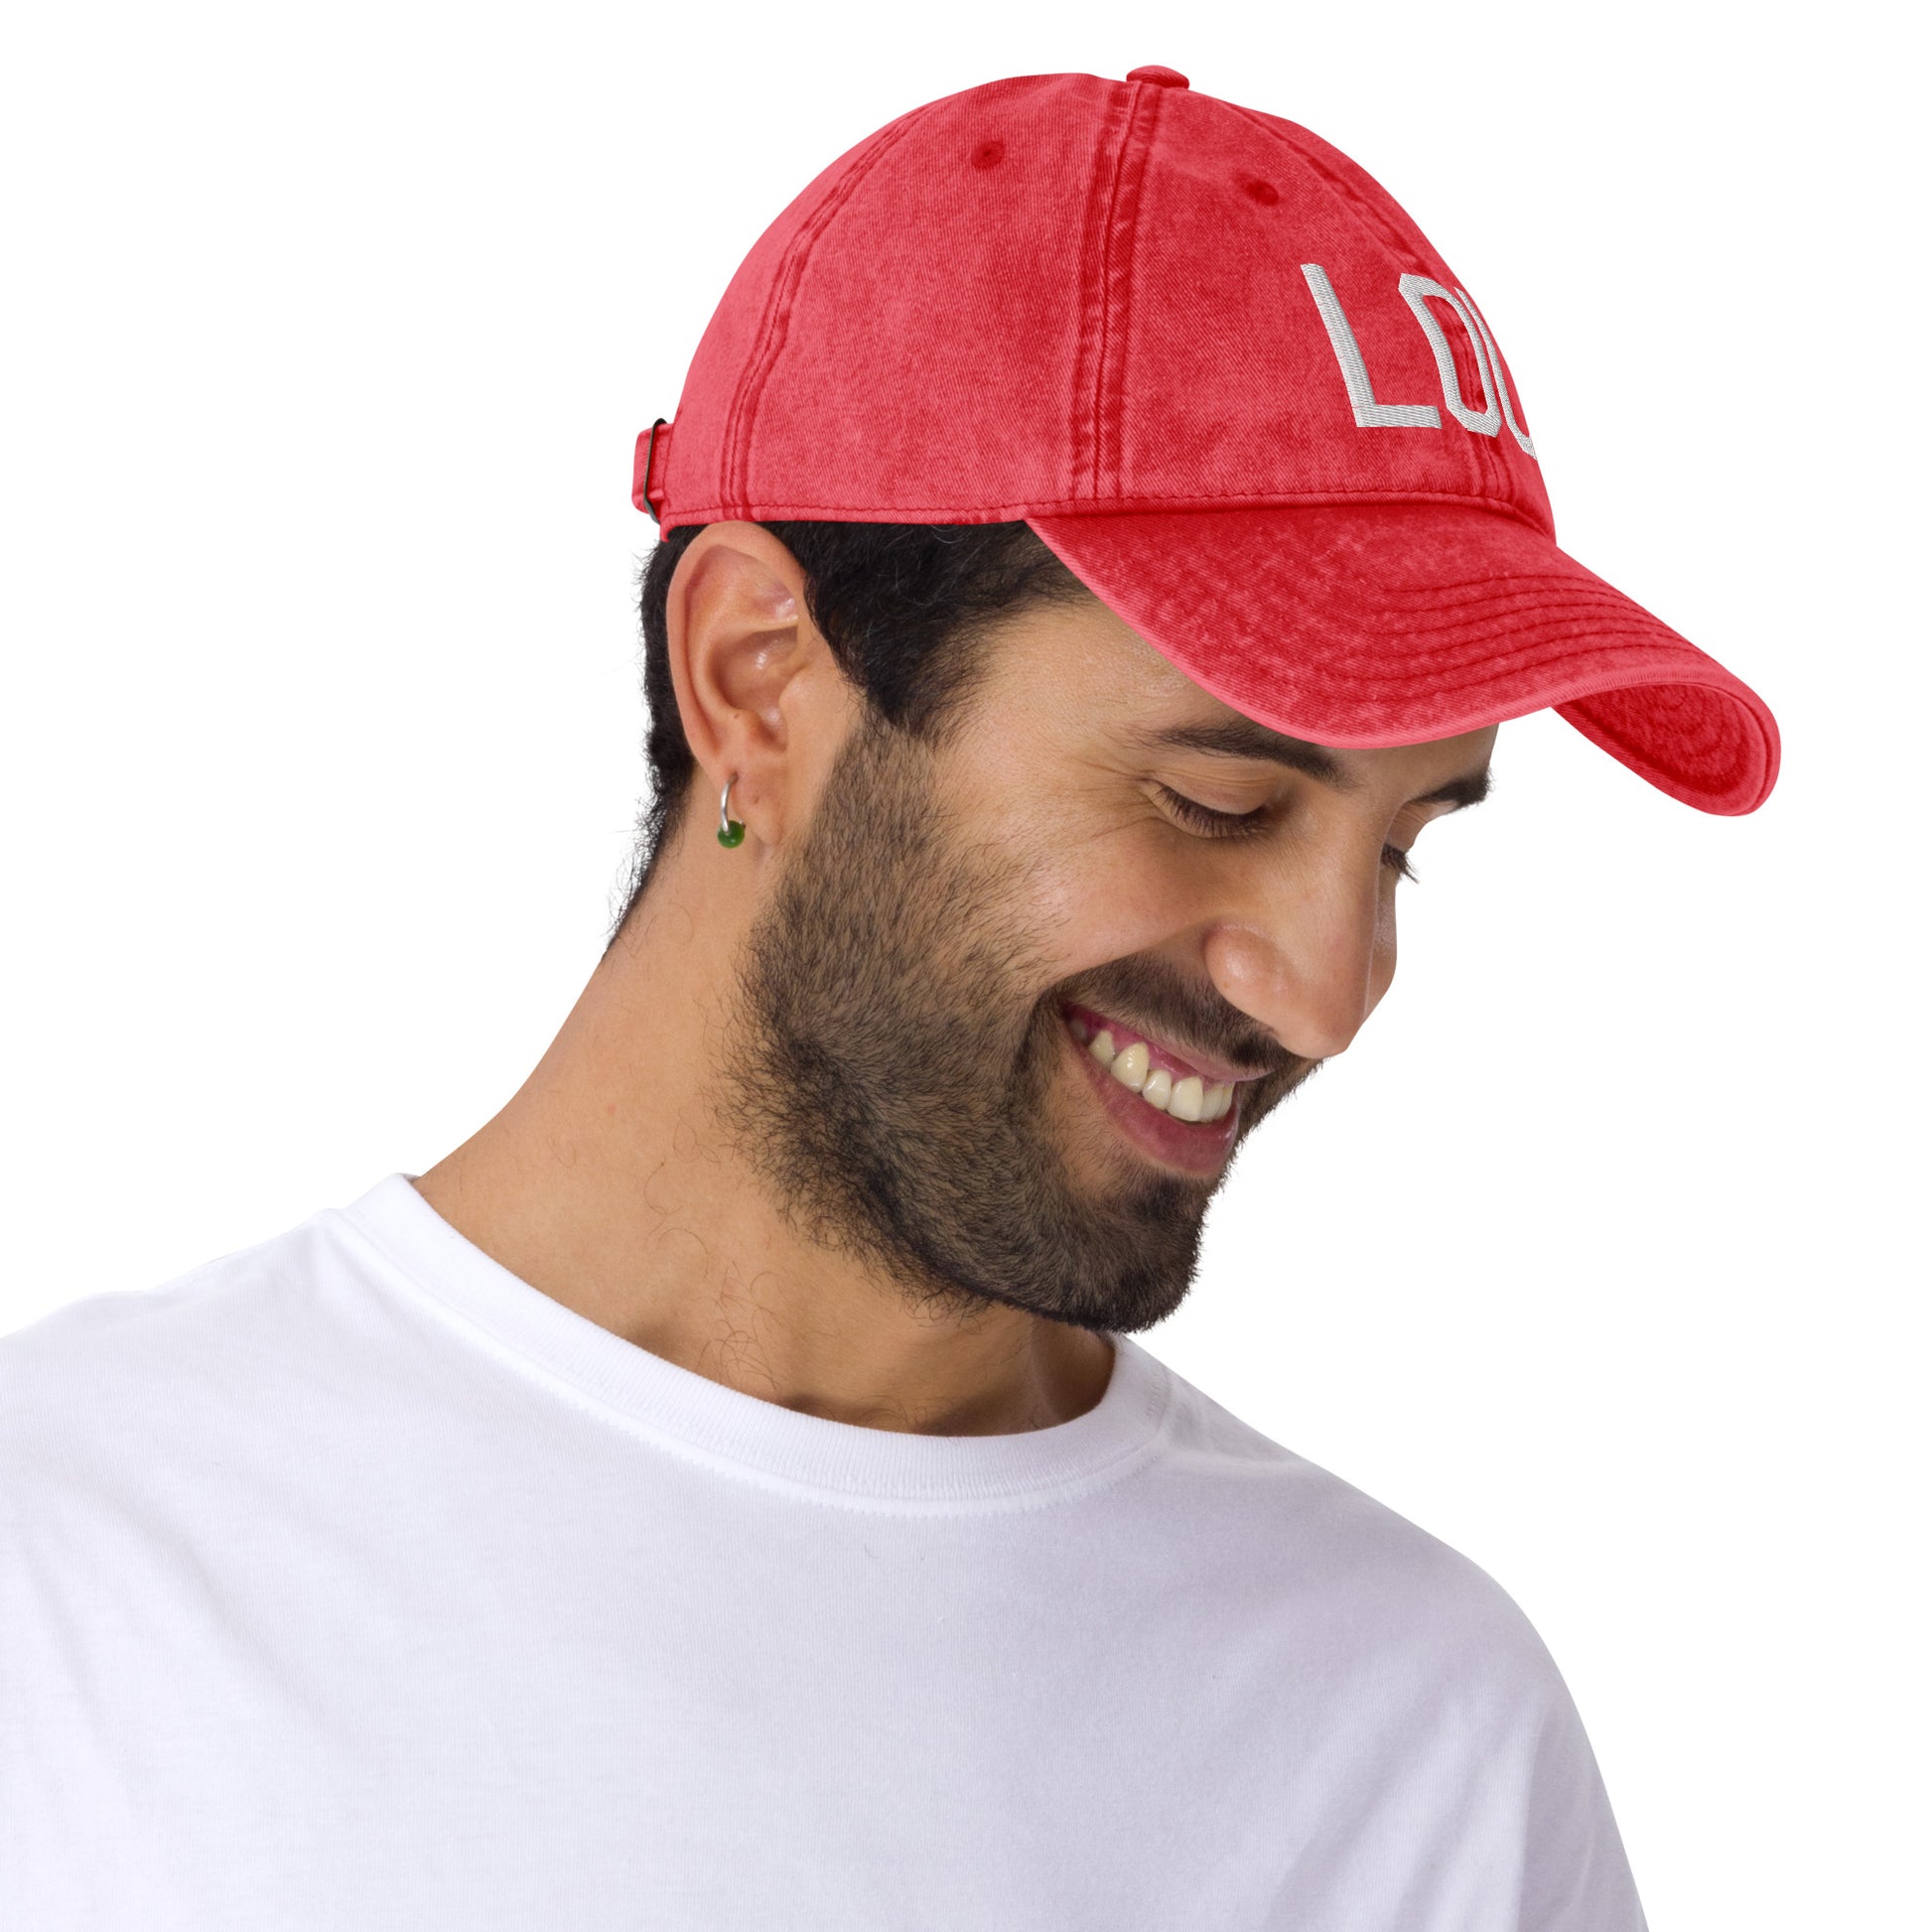 Airport Code Twill Cap - White • LOU Louisville • YHM Designs - Image 08